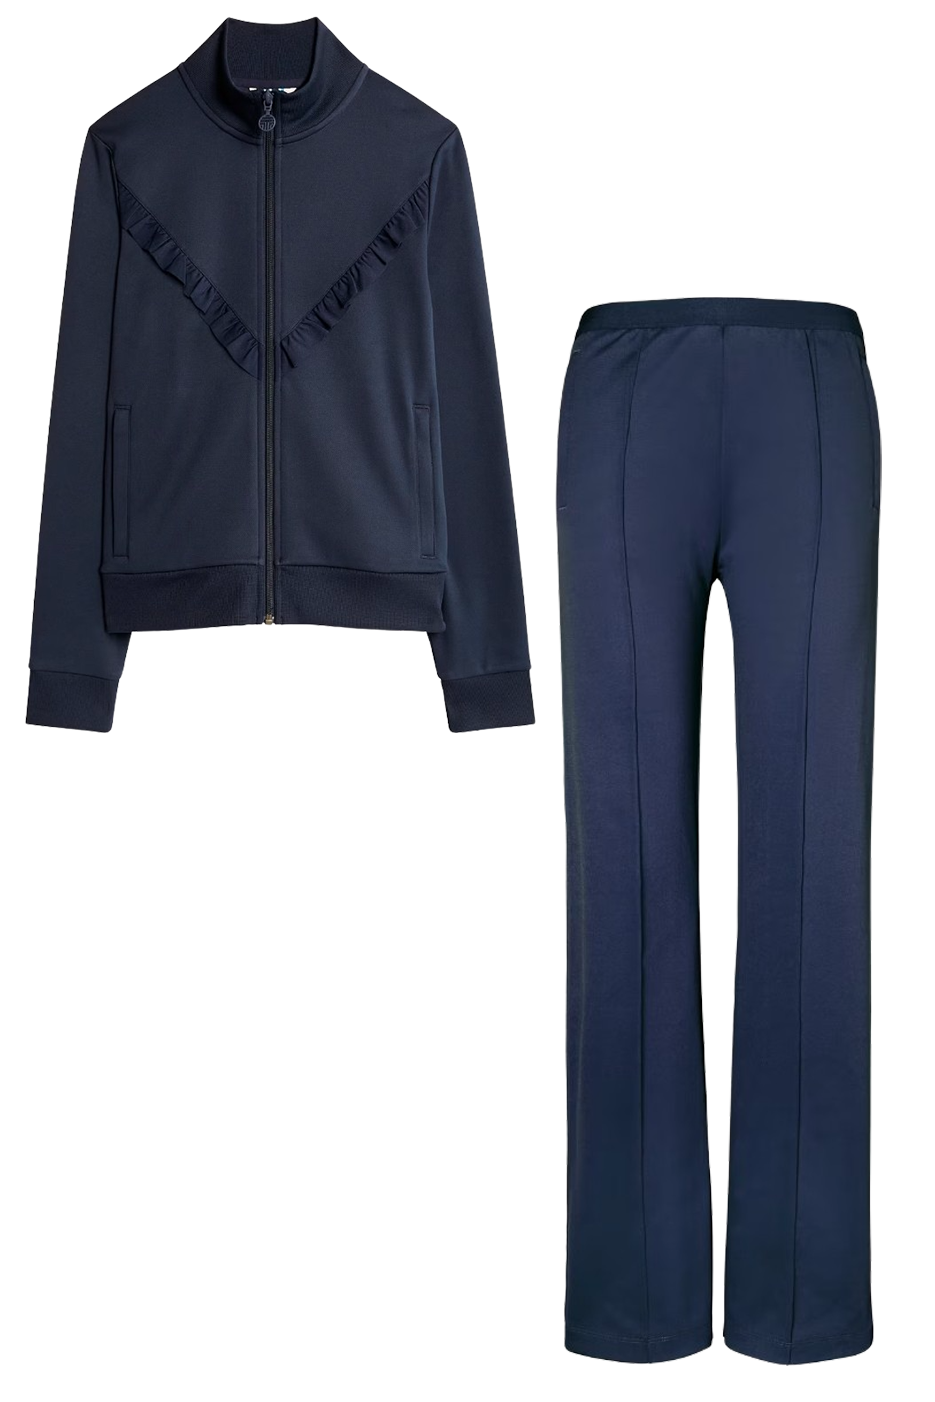 Women's tracksuits 2023: 8 best tracksuits to wear when WFH